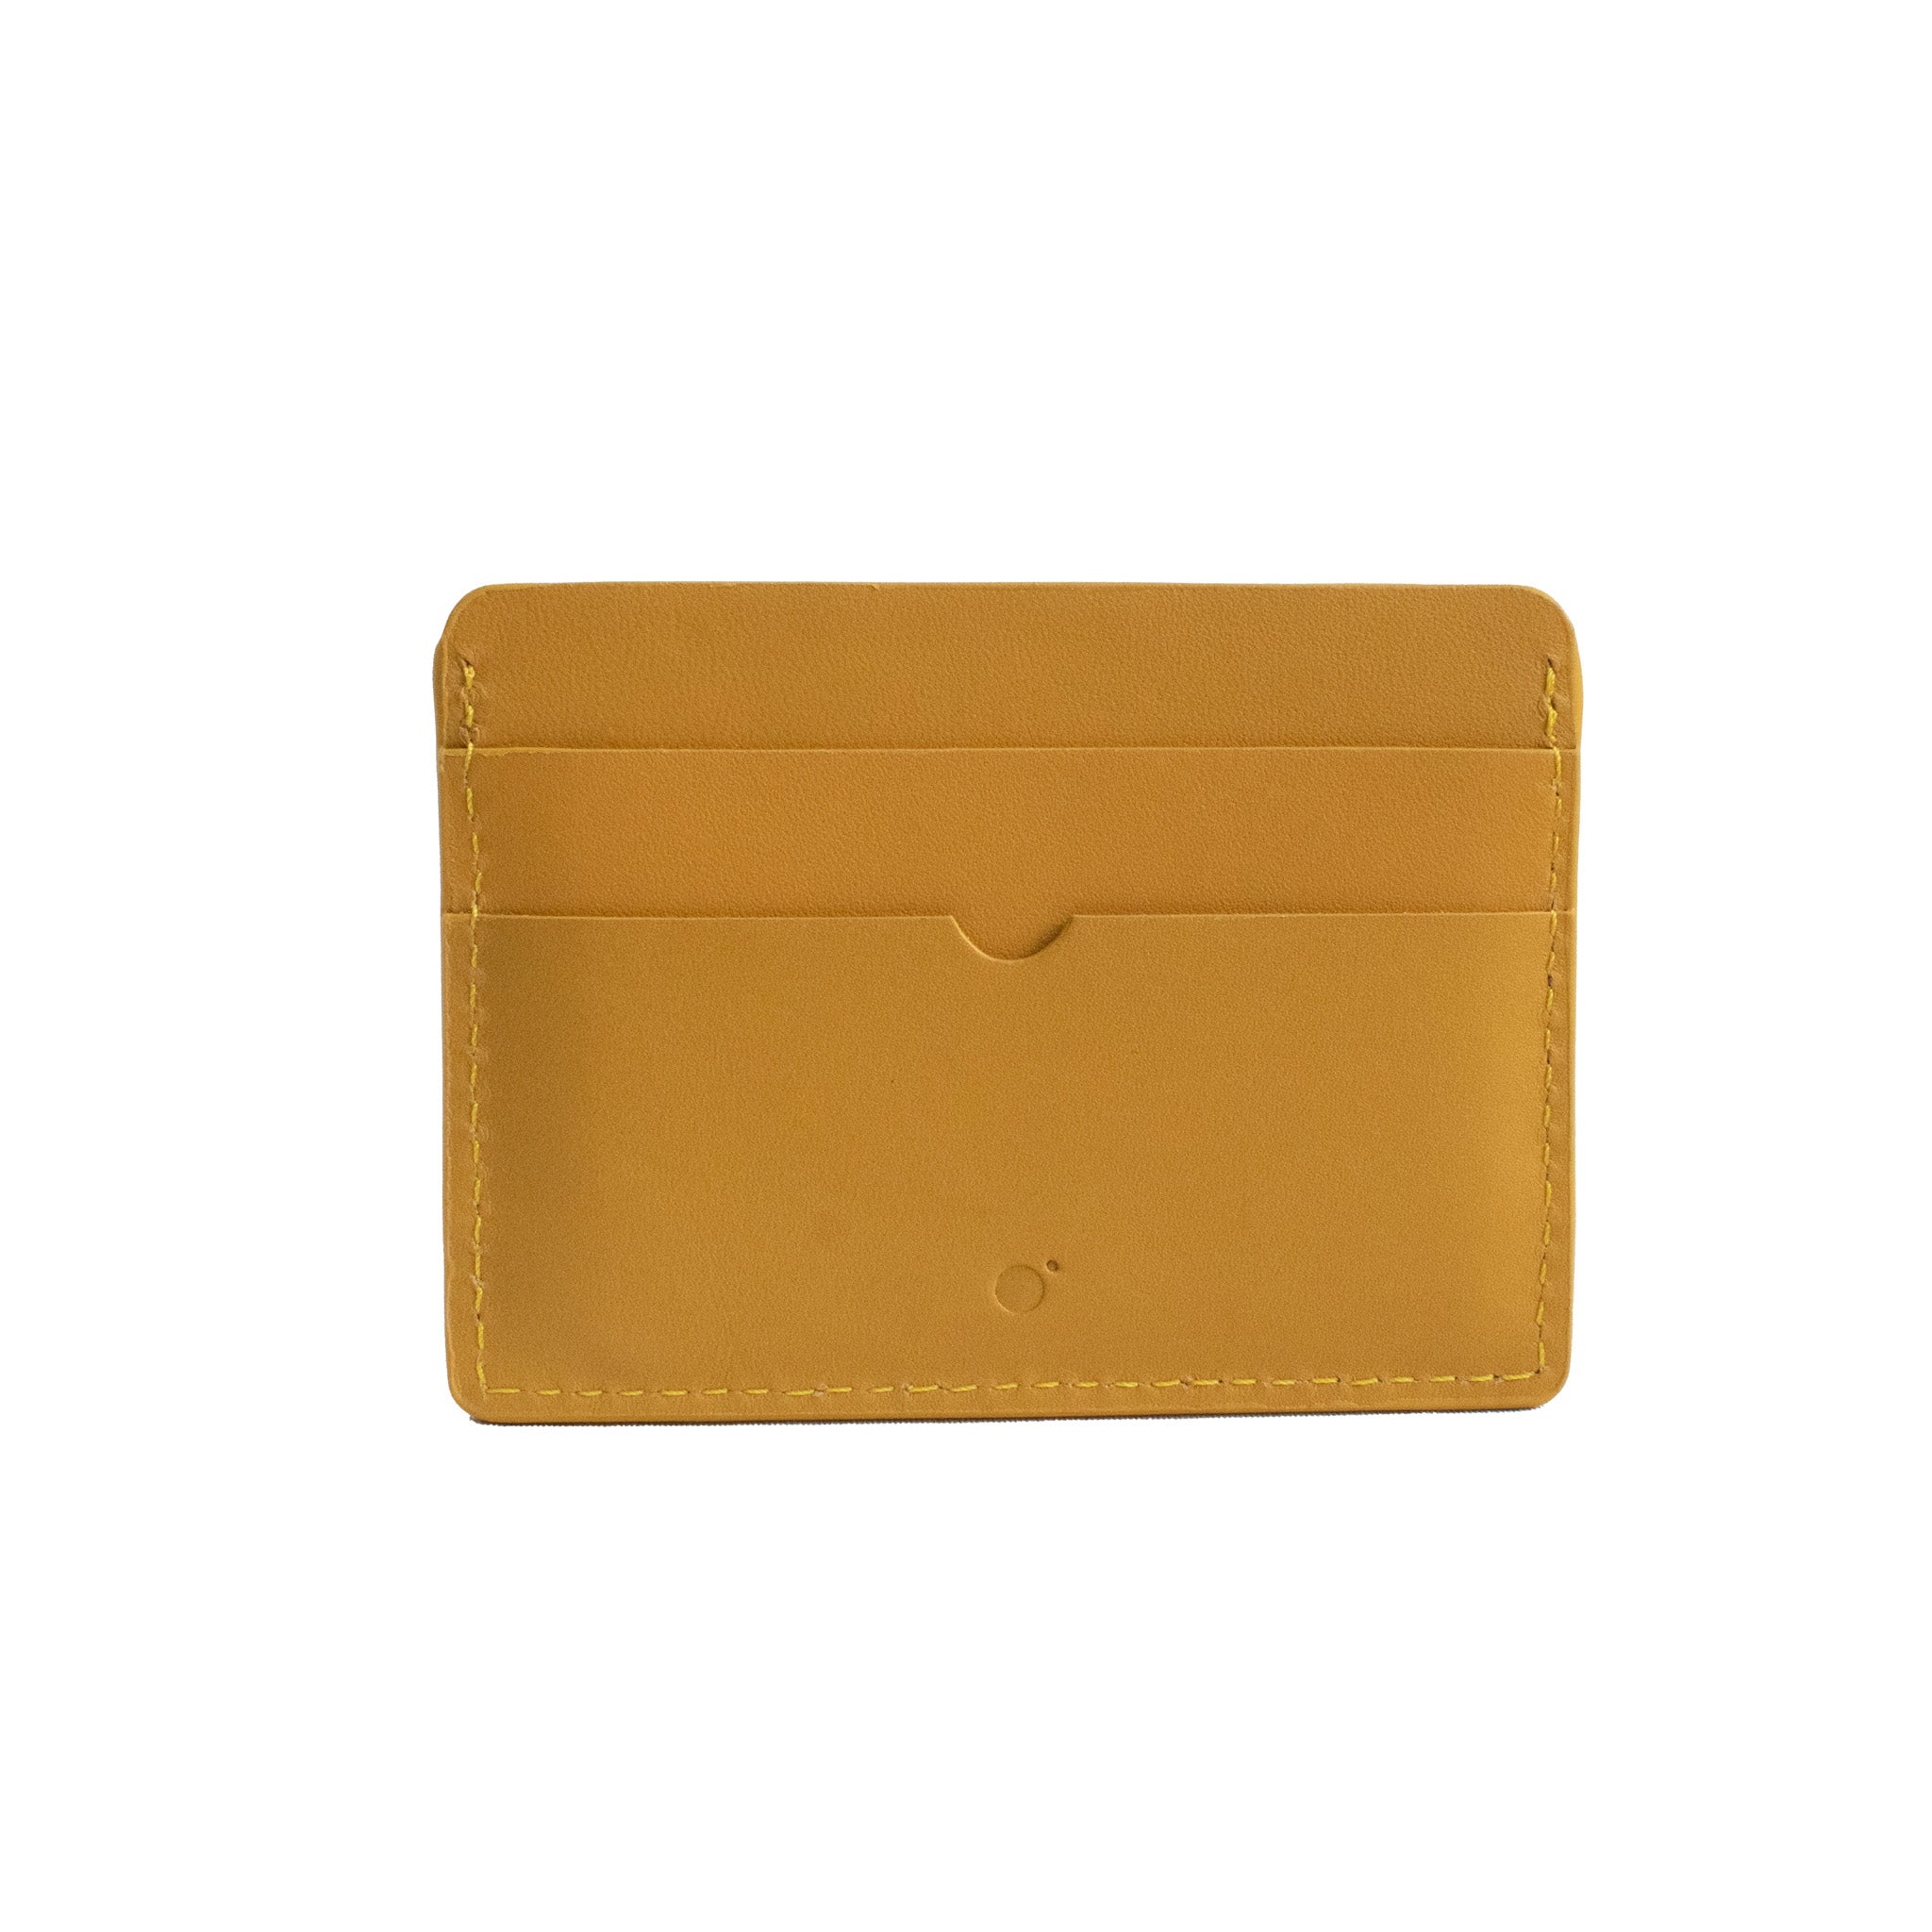 Card Case in Amber Yellow